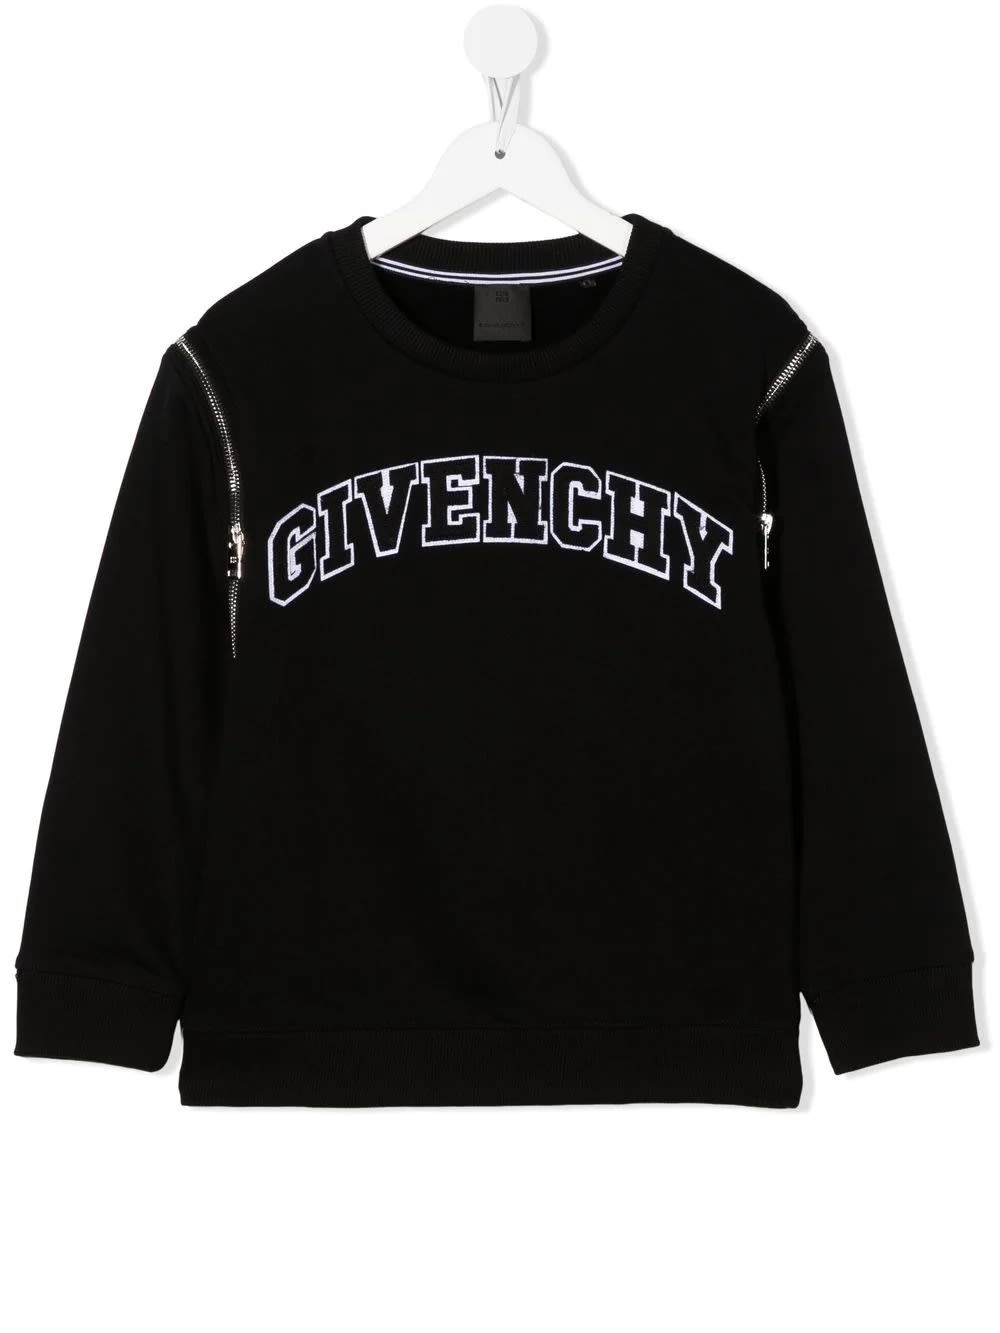 Black Sweatshirt With Givenchy Old School Print